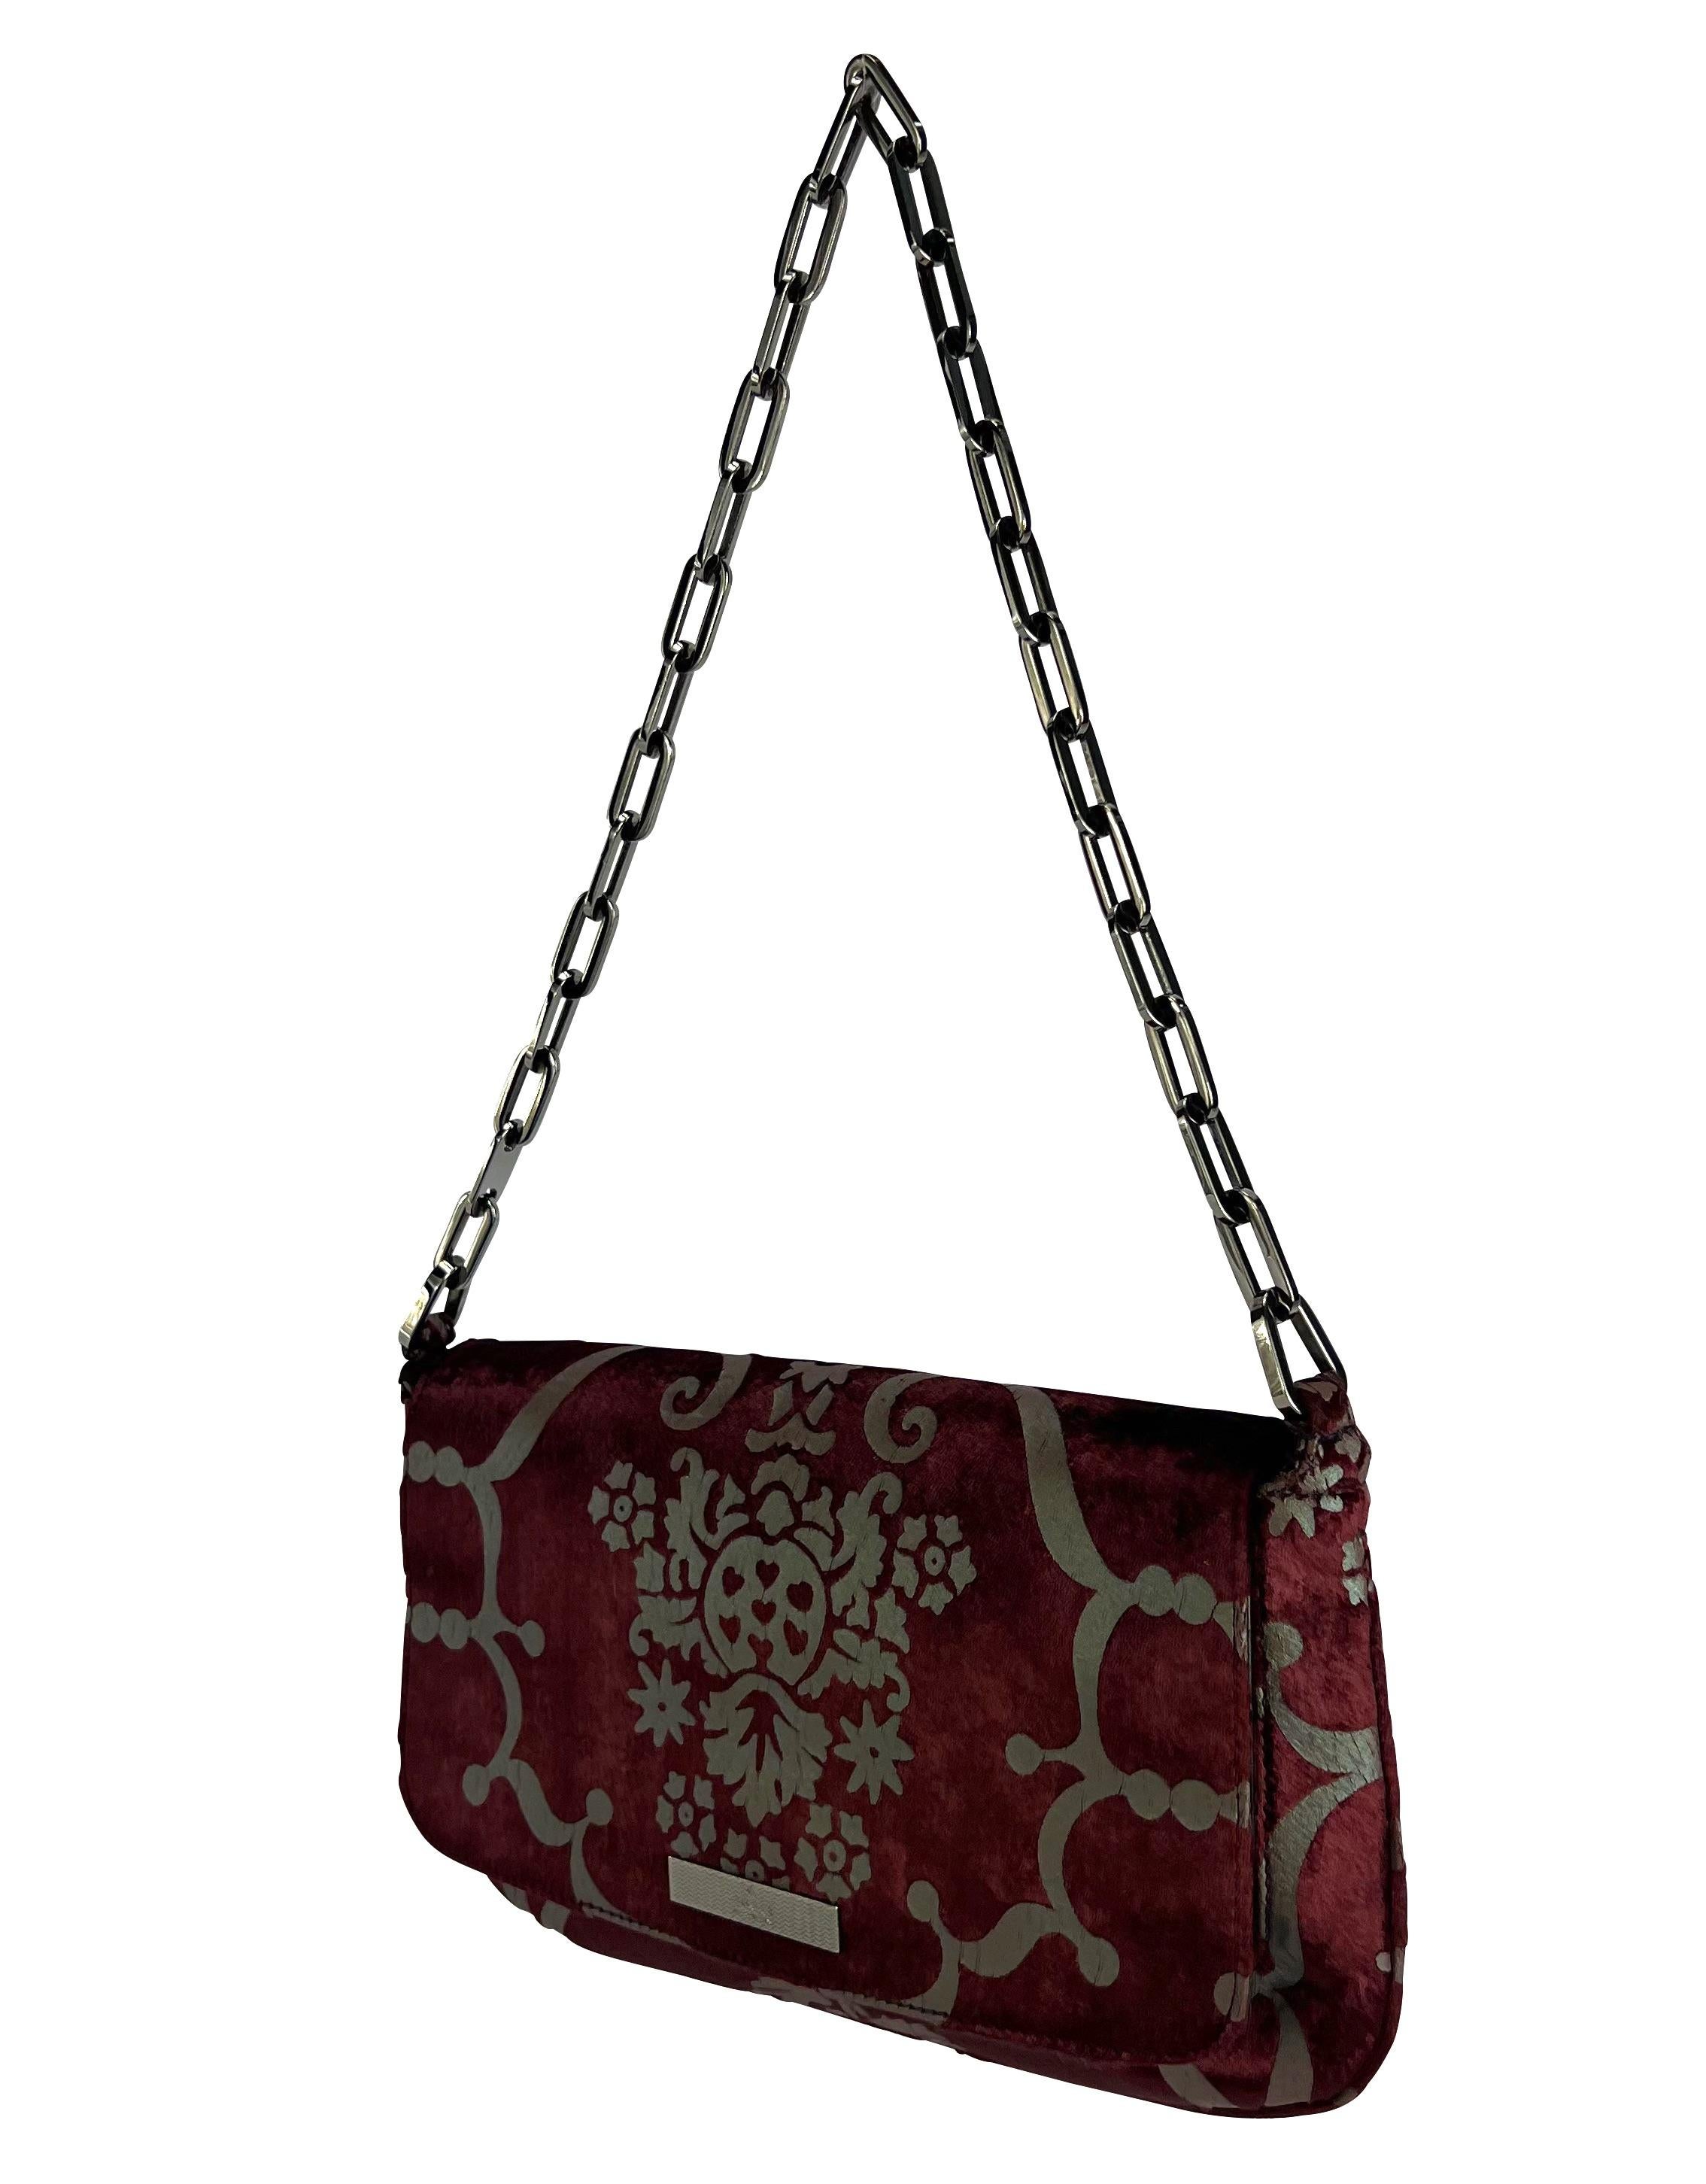 Presenting a fabulous burgundy velvet Gucci chain shoulder bag designed by Tom Ford. This Spring/Summer 2000 collection bag features a gunmetal-tone baroque pattern atop the luxurious deep red velvet. Add this timeless Gucci by Tom Ford bag to your